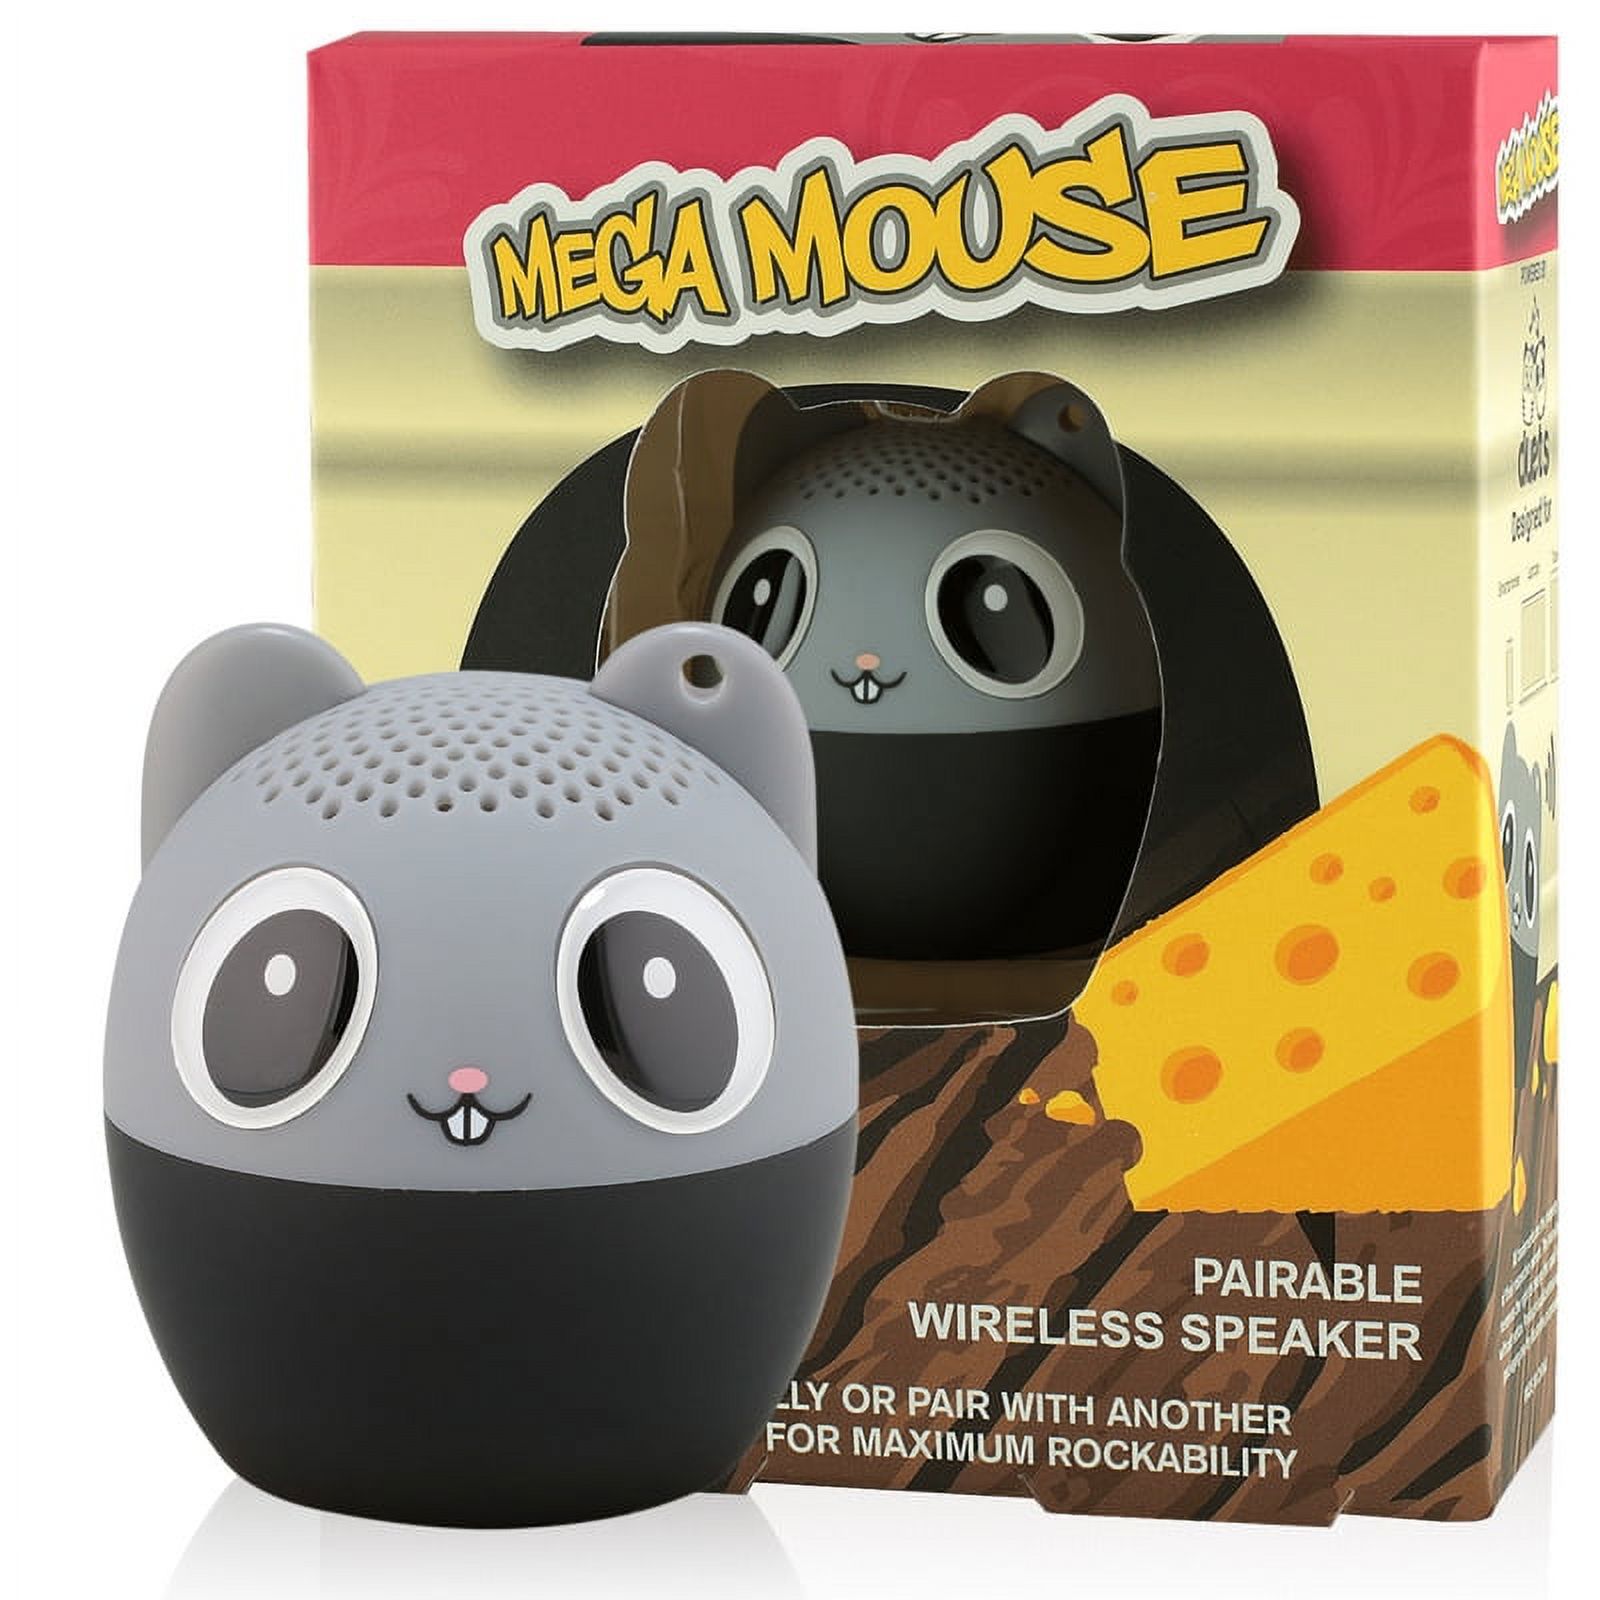 My Audio Pet (TWS) Mini Bluetooth Animal Wireless Speaker with TRUE WIRELESS STEREO TECHNOLOGY _ Pair with another TWS Pet for Powerful Rich Room-filling Sound _ (Mega Mouse) - image 1 of 6